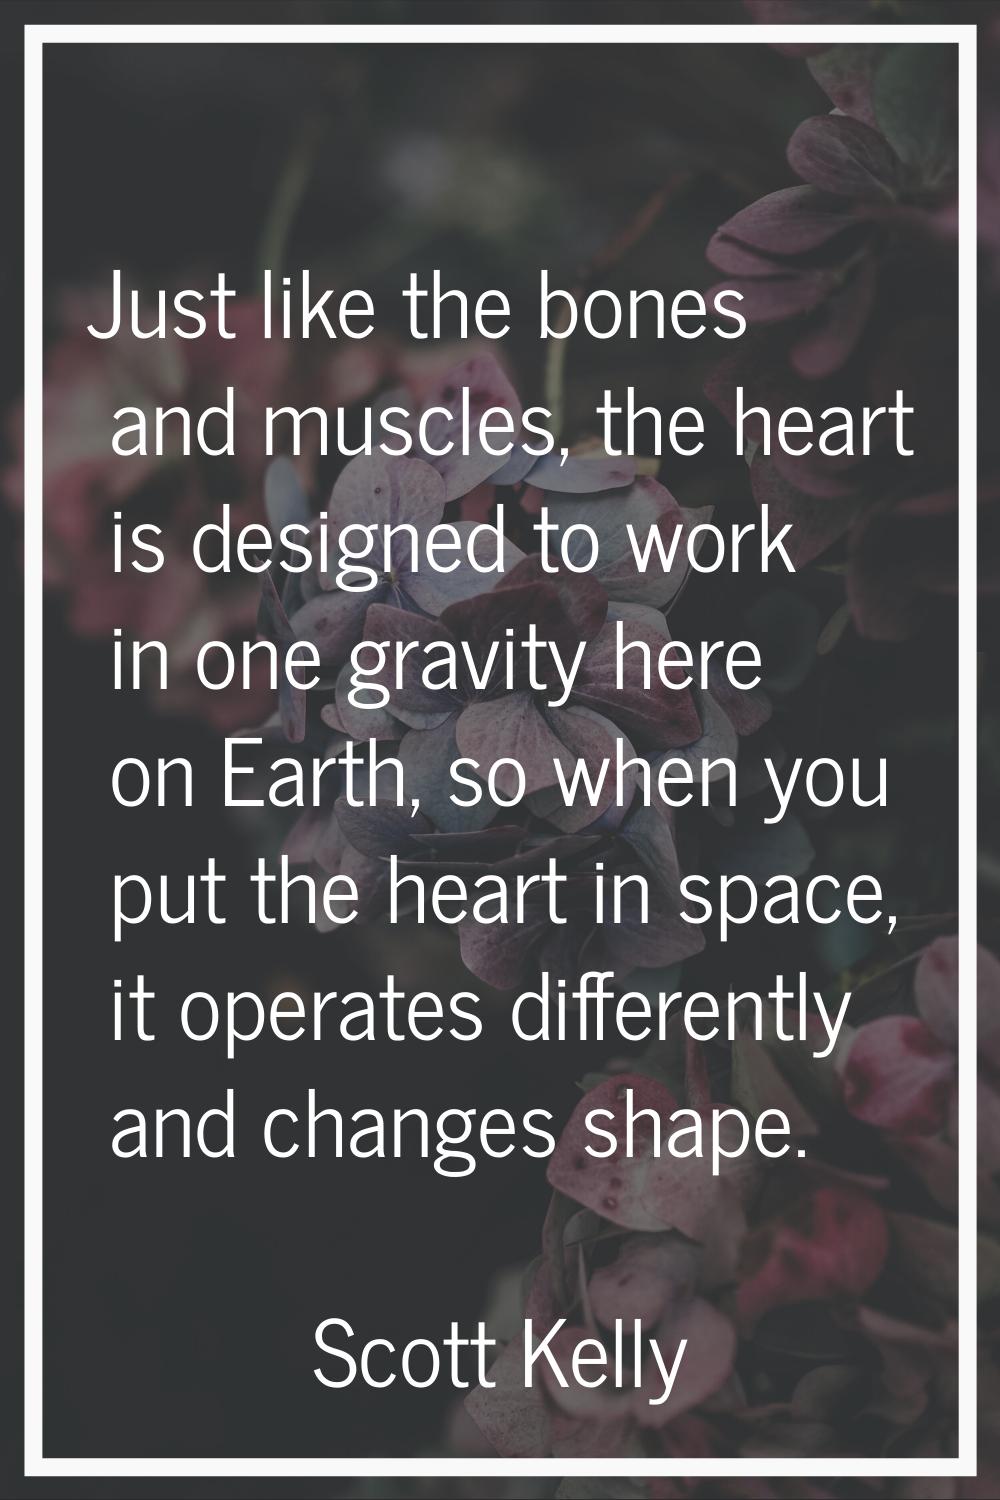 Just like the bones and muscles, the heart is designed to work in one gravity here on Earth, so whe